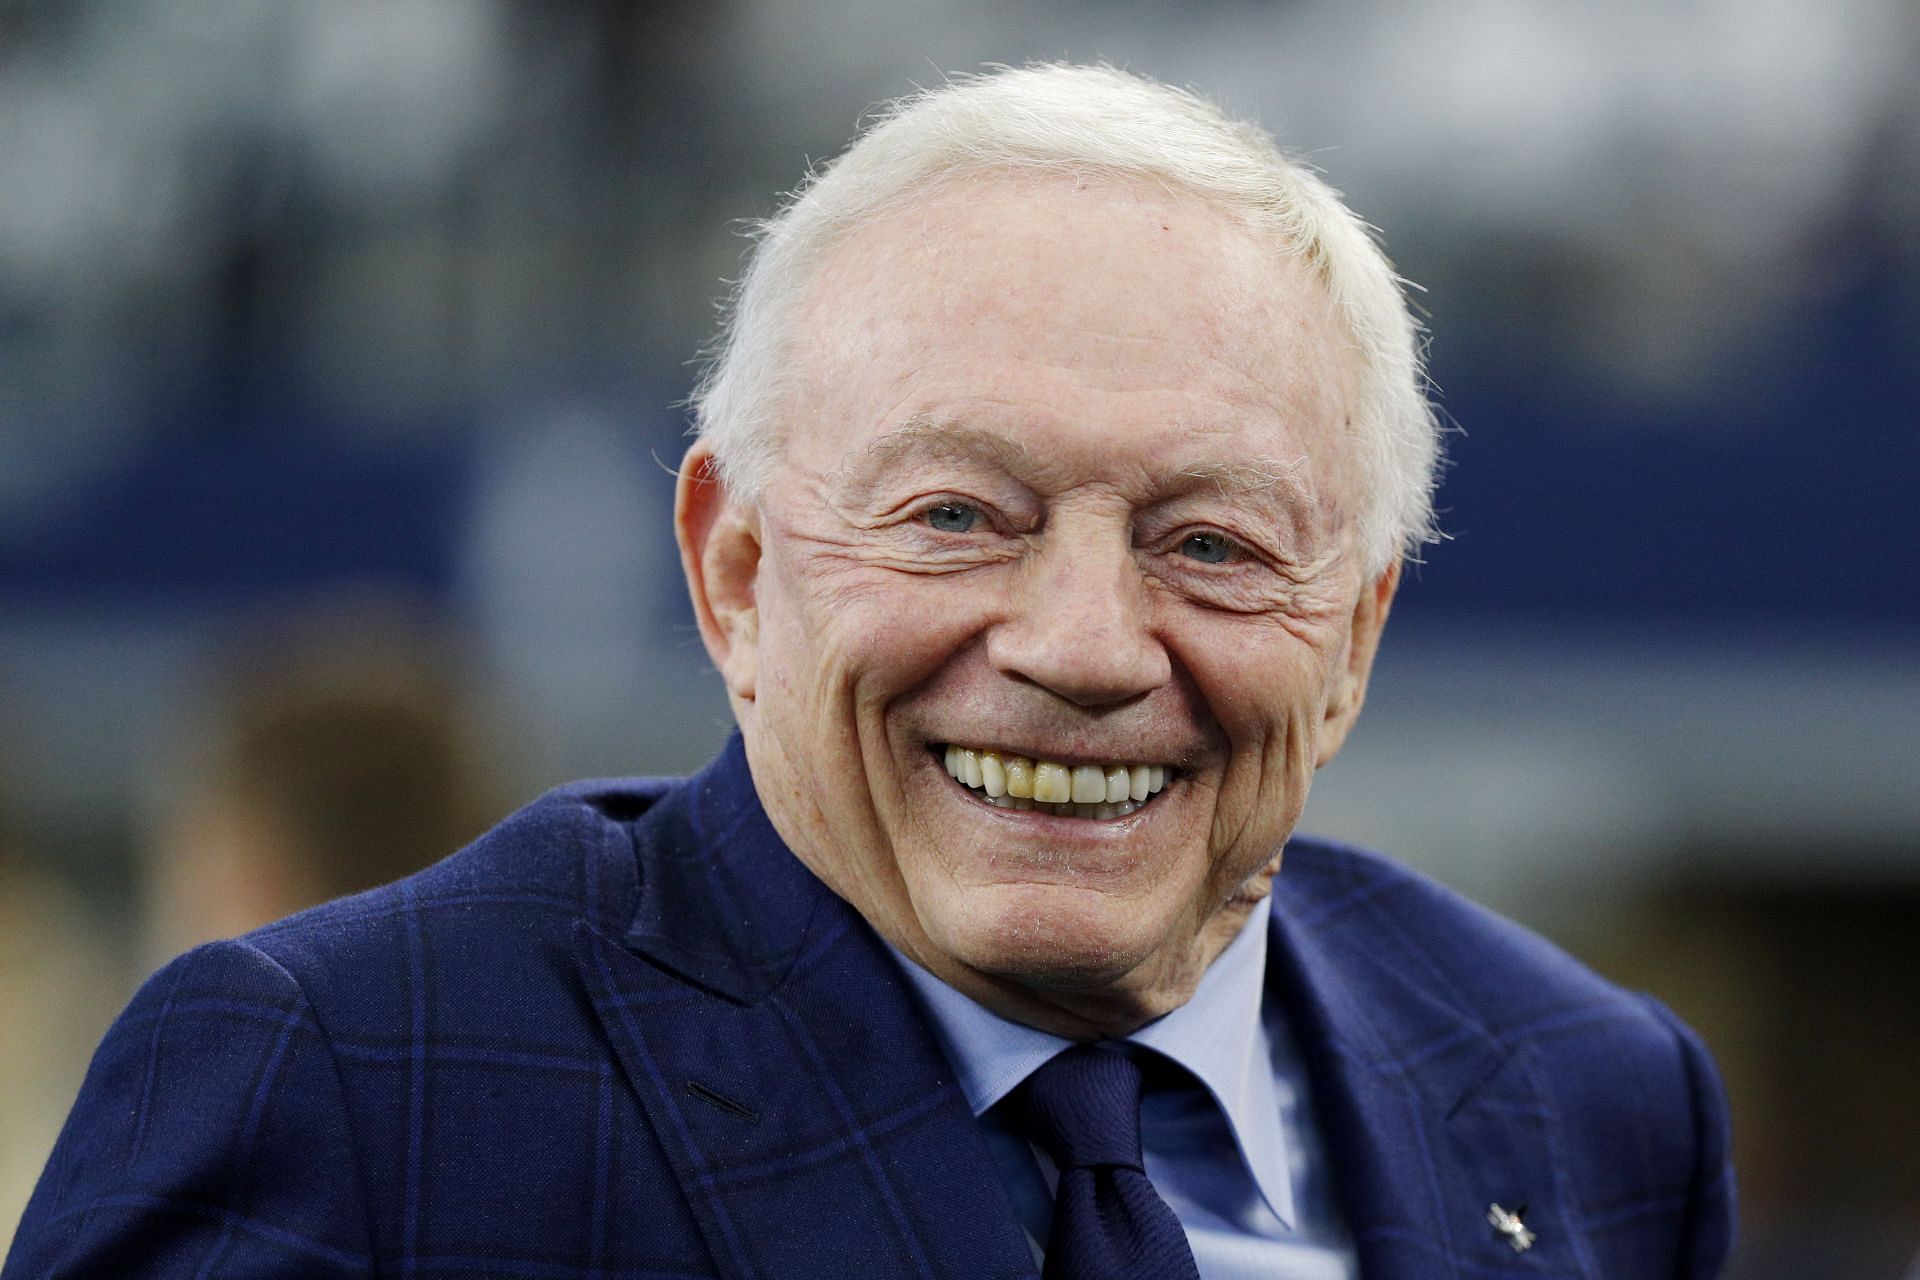 Jerry Jones, owner of the Dallas Cowboys